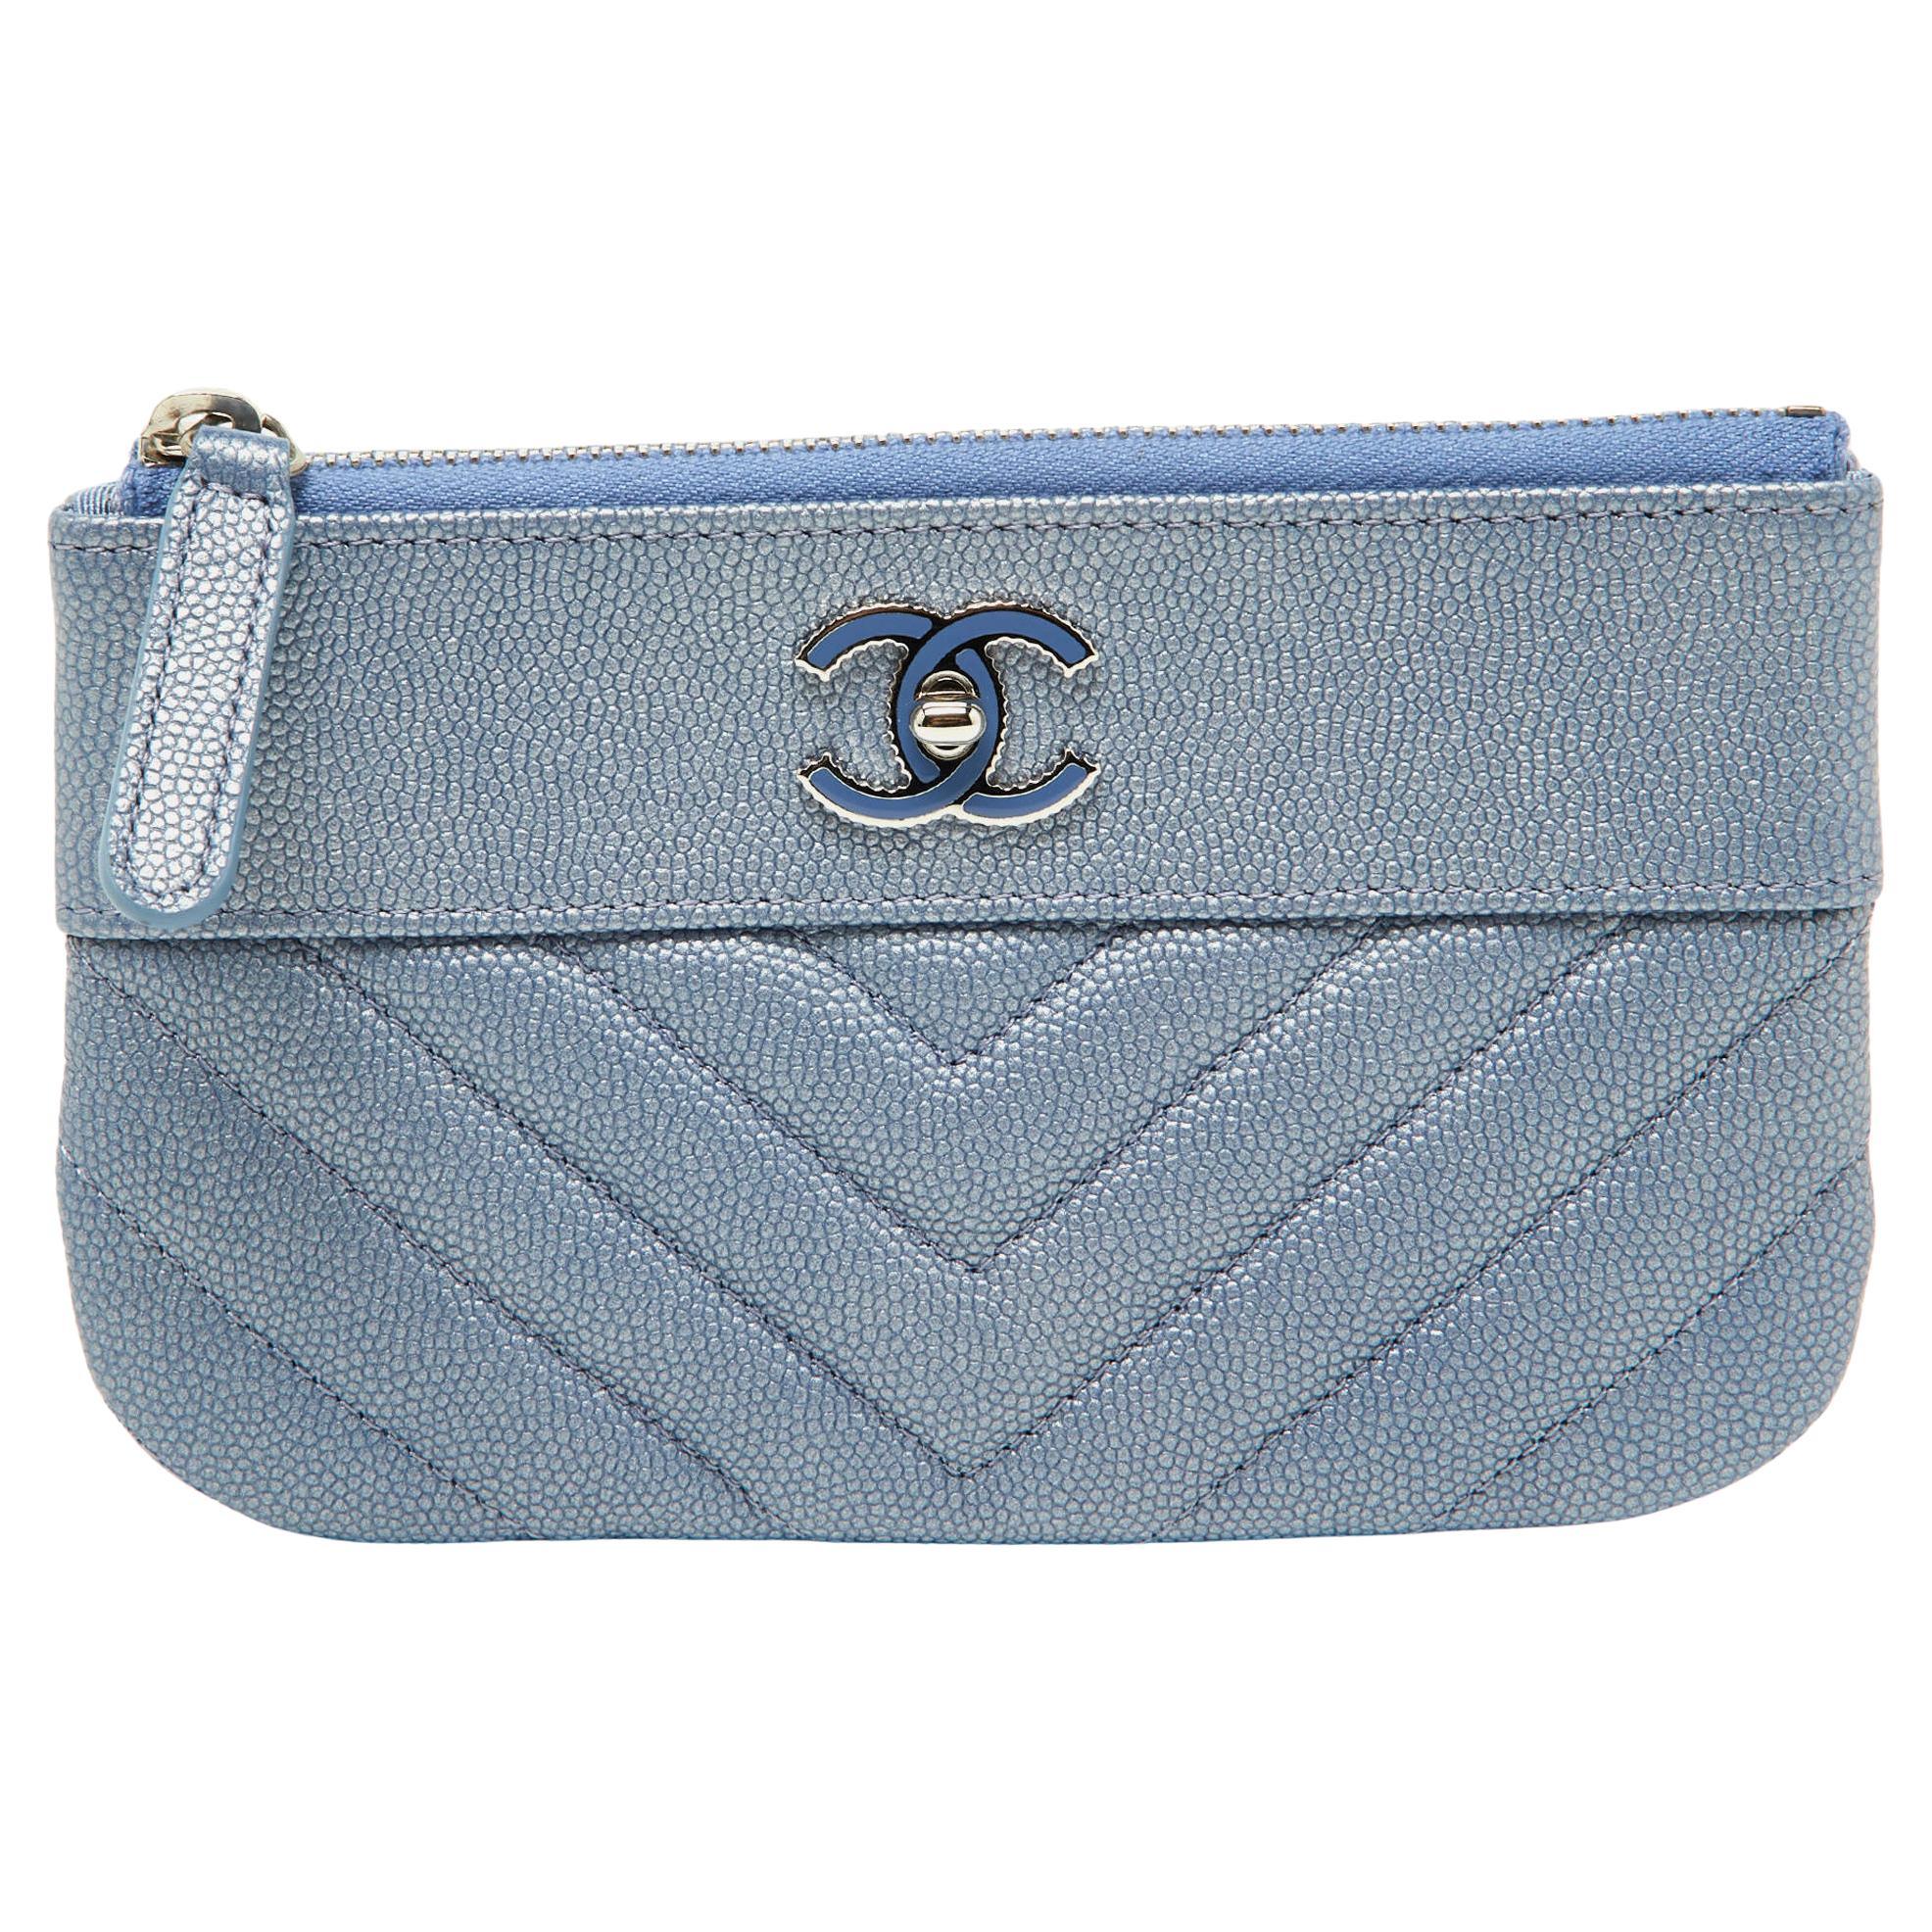 Chanel Blue Quilted Caviar Leather CC Zip Pouch